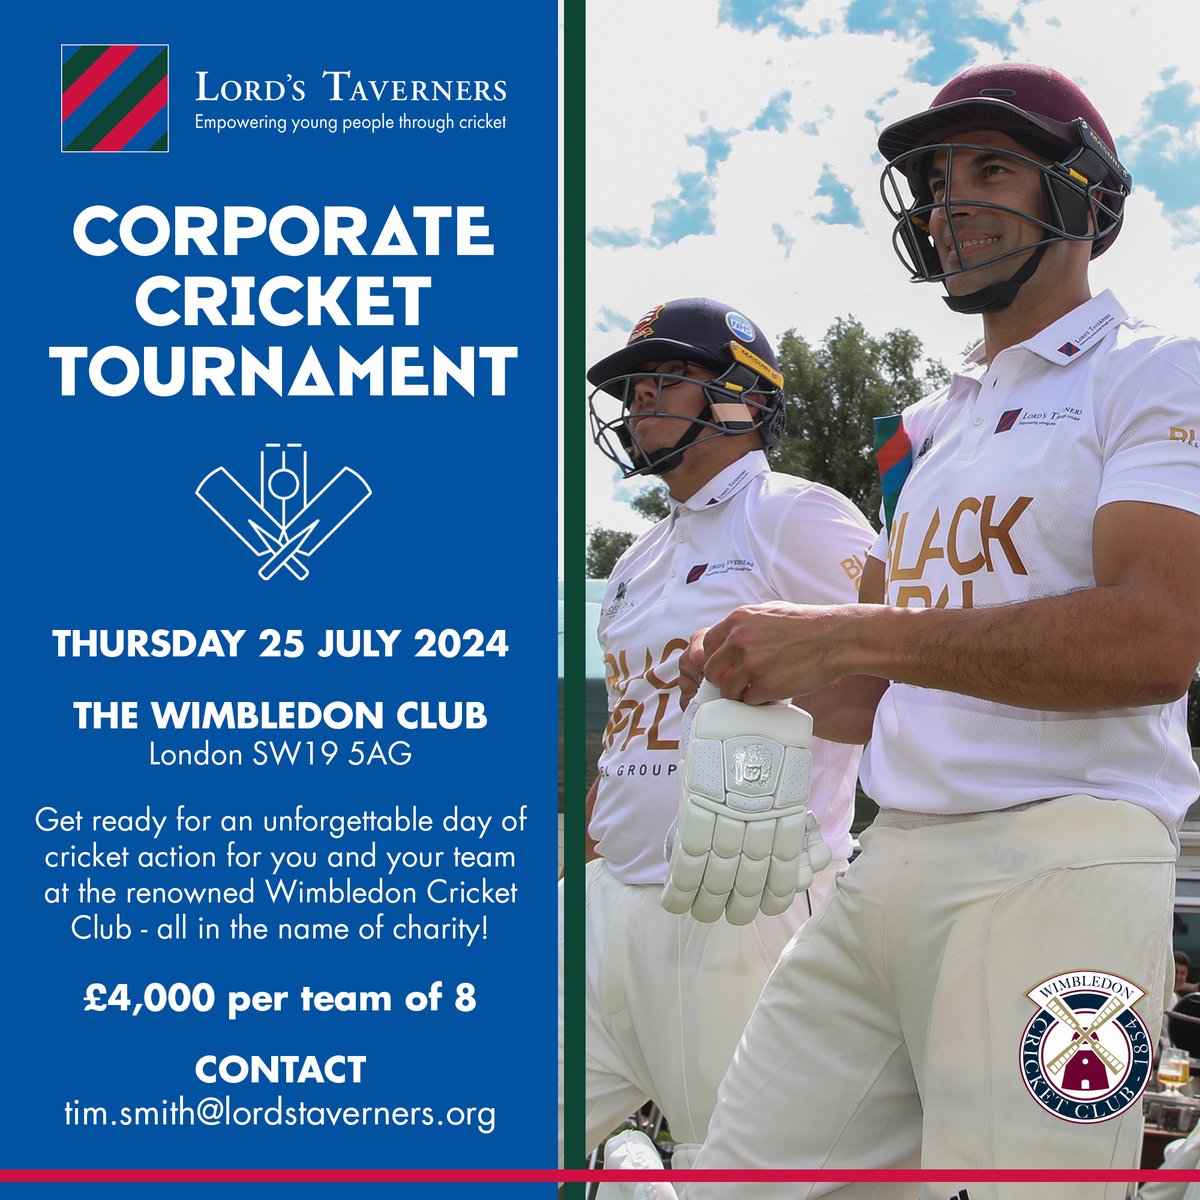 Join other businesses from across London in a day-long tournament at one of the city’s finest cricket grounds @wimbledoncrick, networking with others across industries, and engaging with the impactful work we do 🏏 Contact tim.smith@lordstaverners.org today!